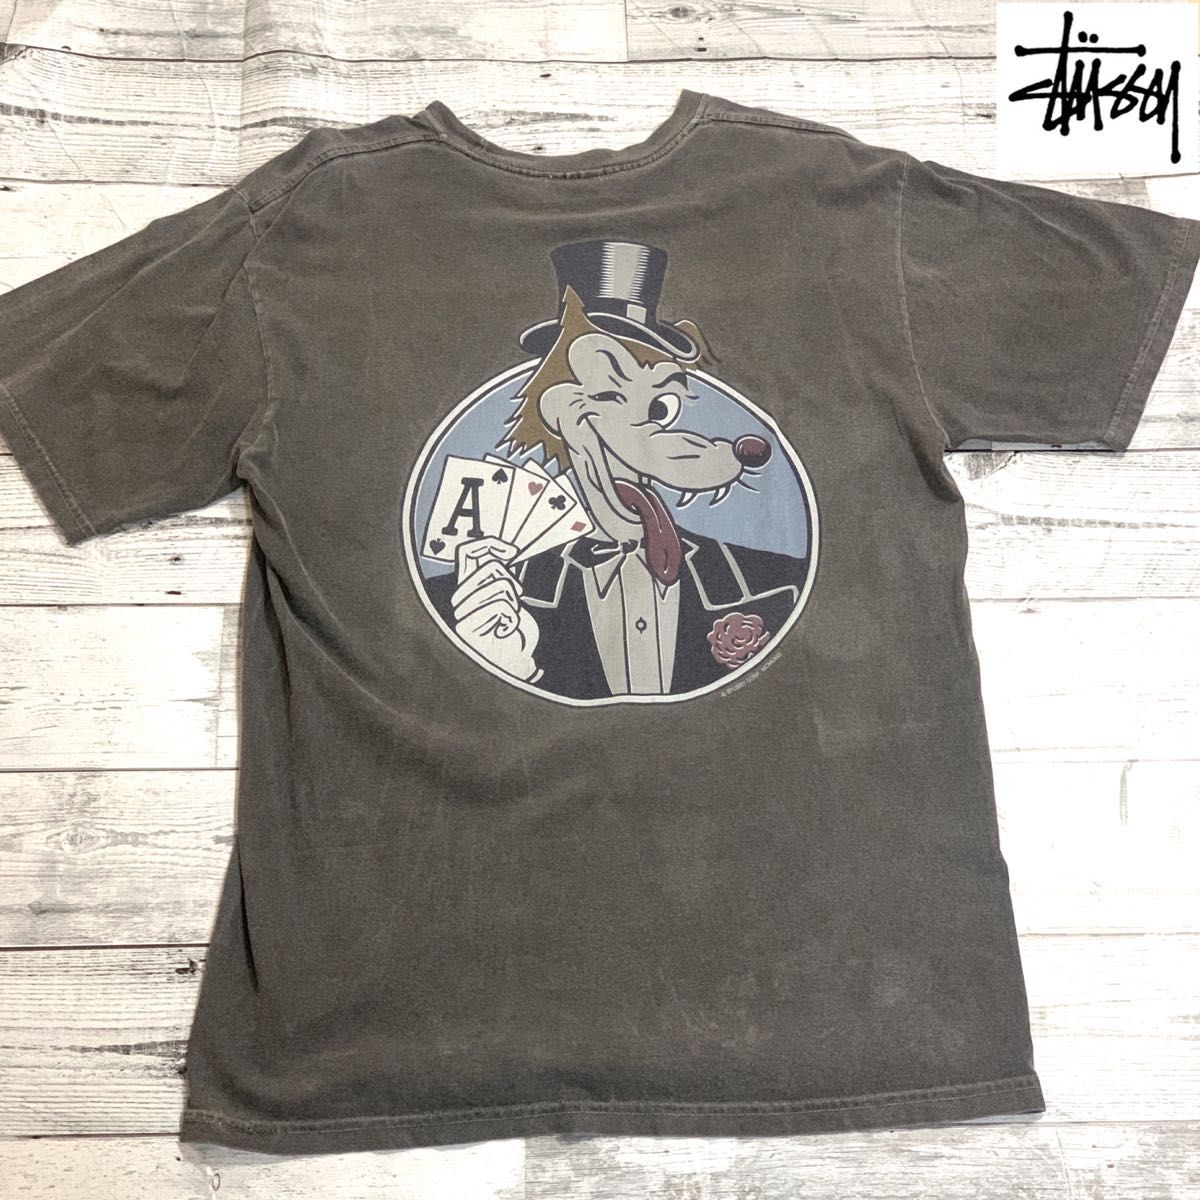 deadstock 80's VINTAGE USA製 OLD stussy ボーダー 総柄 Tシャツ 初期